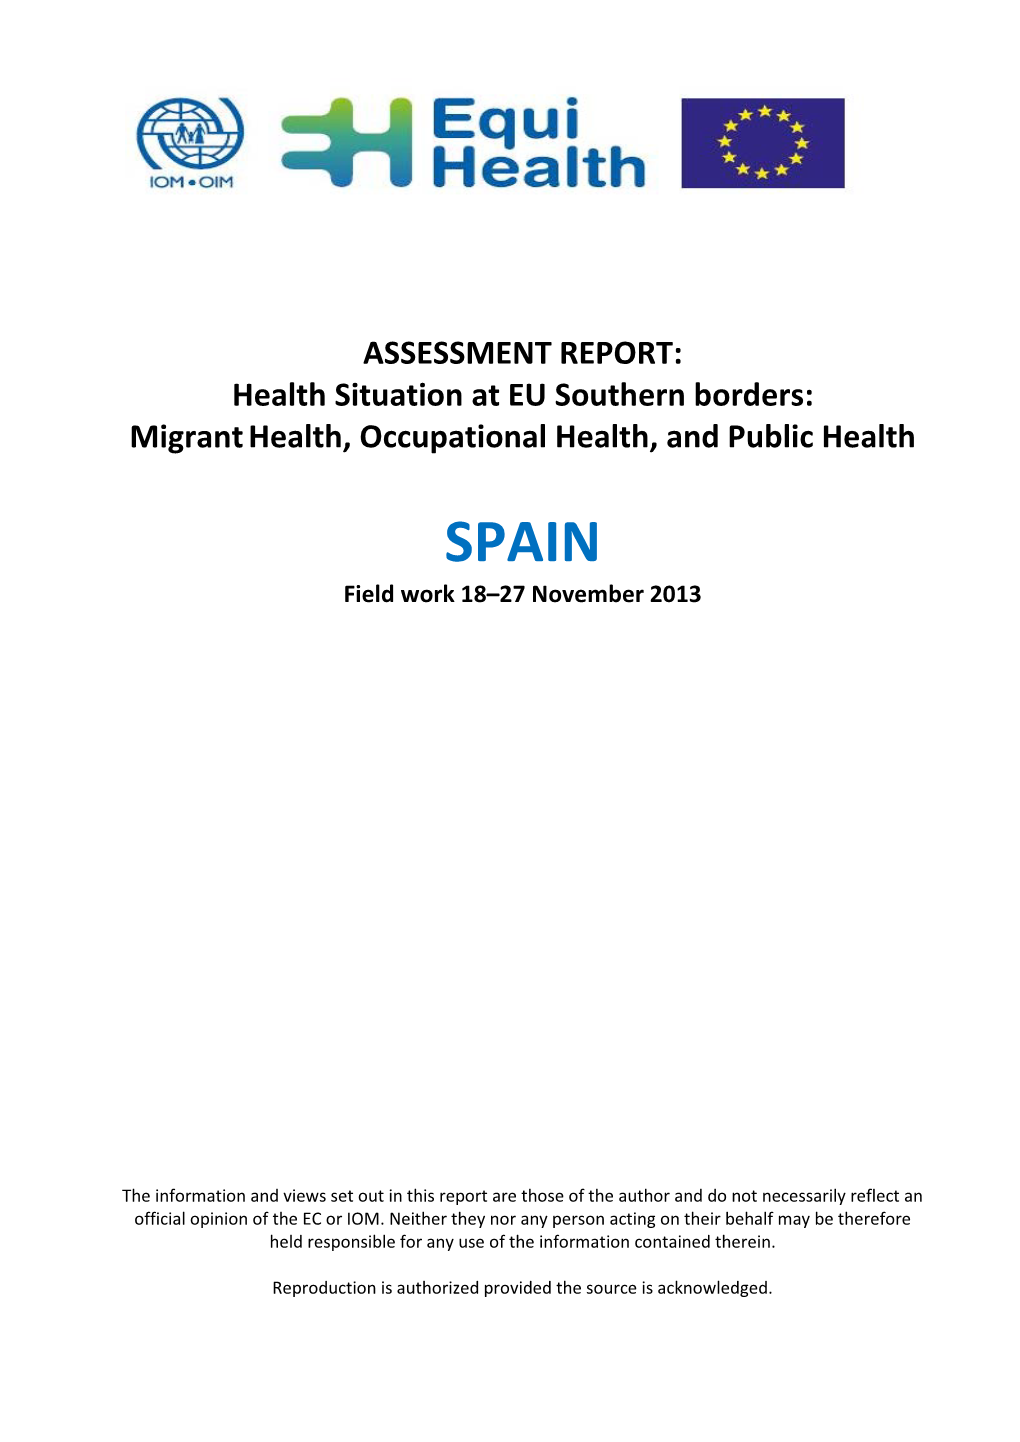 Health Situation at EU Southern Borders: Migrant Health, Occupational Health, and Public Health